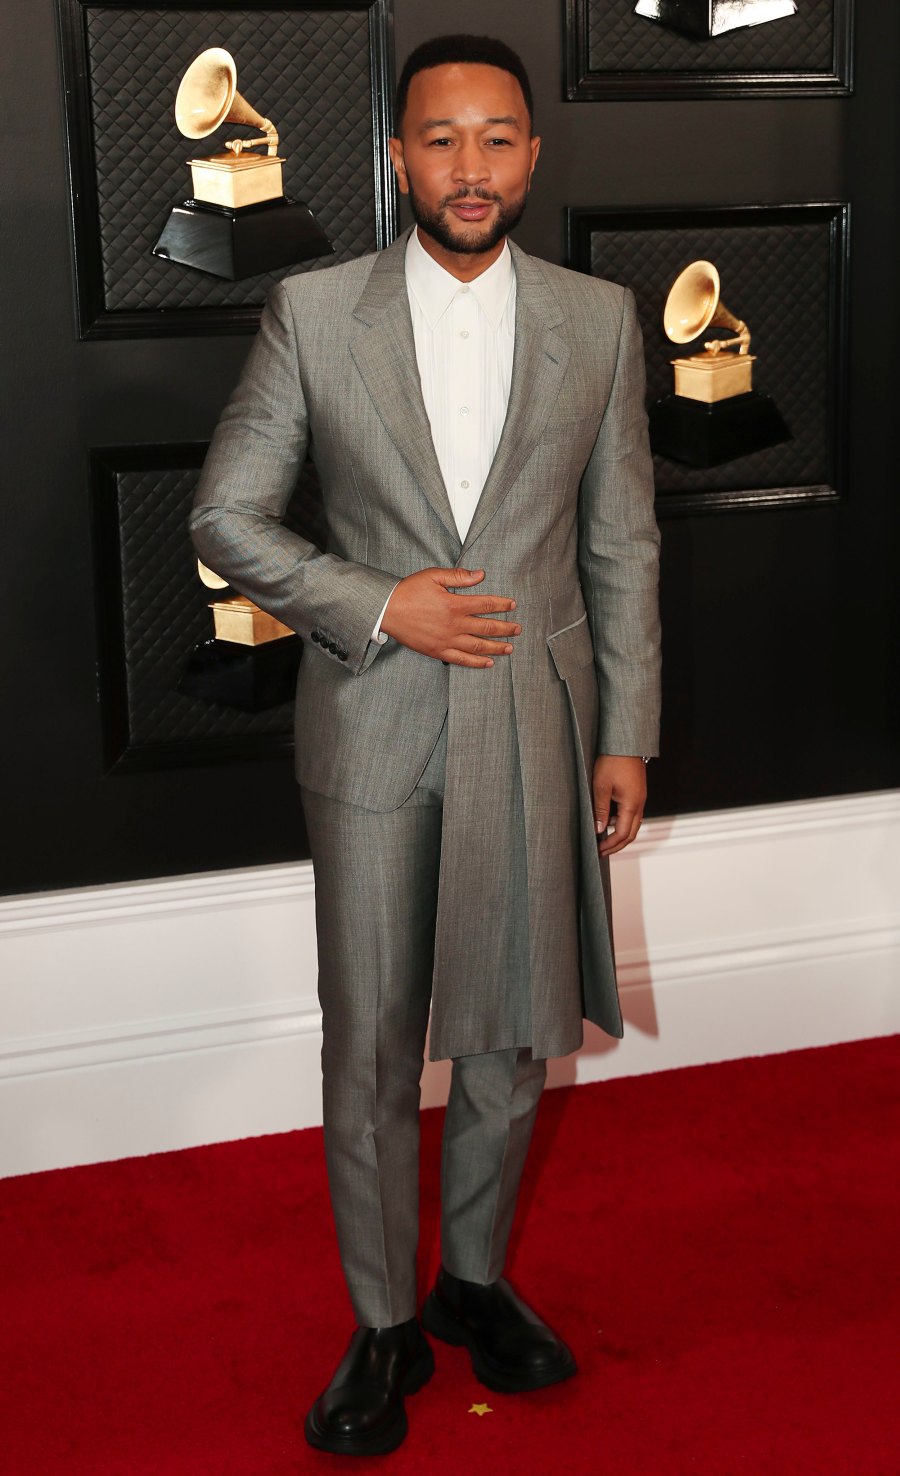 Grammys 2020: Best-Dressed Men in Tuxedos, Suits